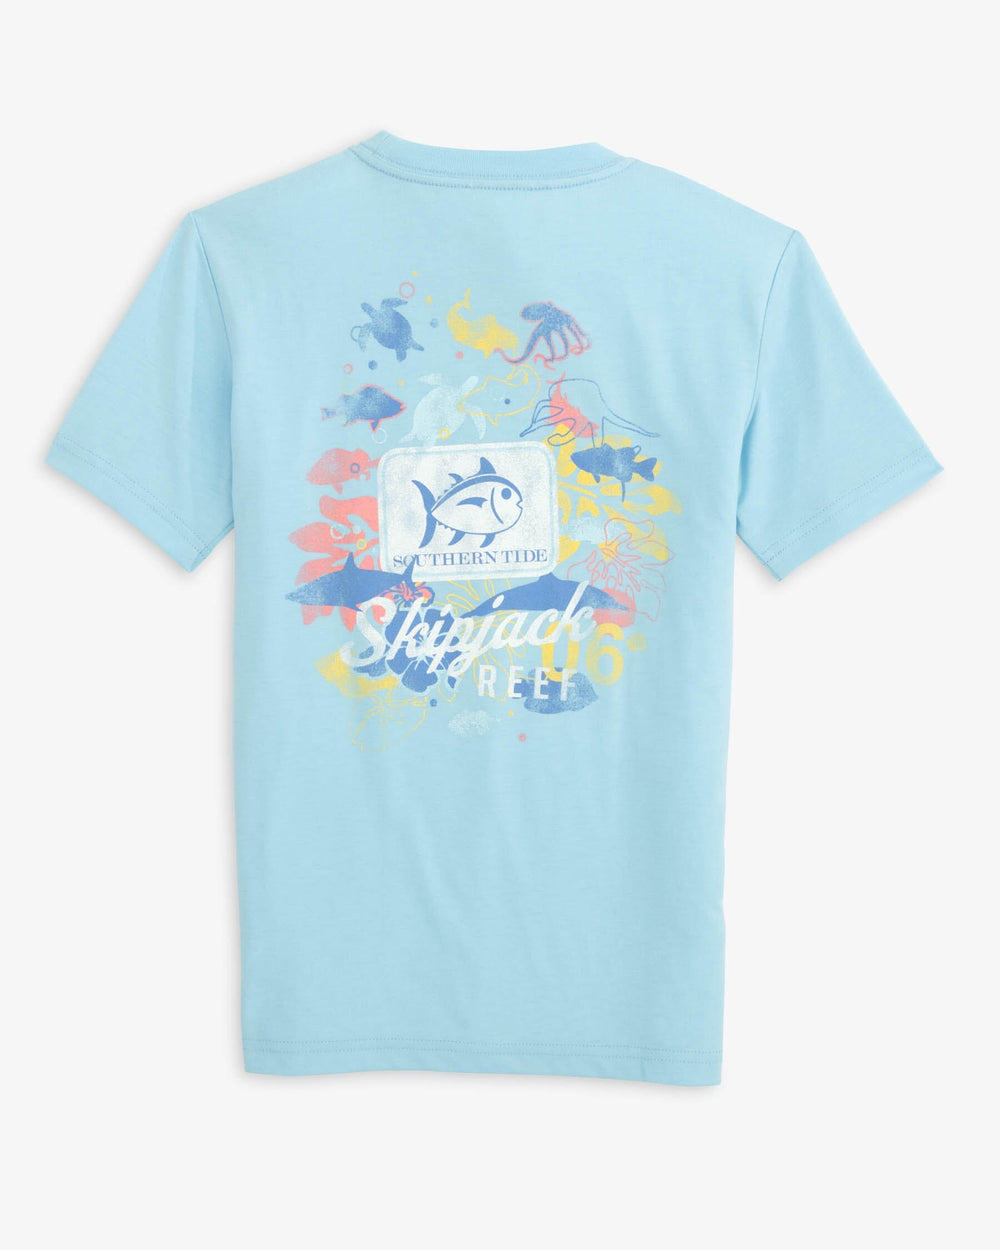 The back view of the Southern Tide Youth Skipjack Reef T-Shirt by Southern Tide - Rain Water